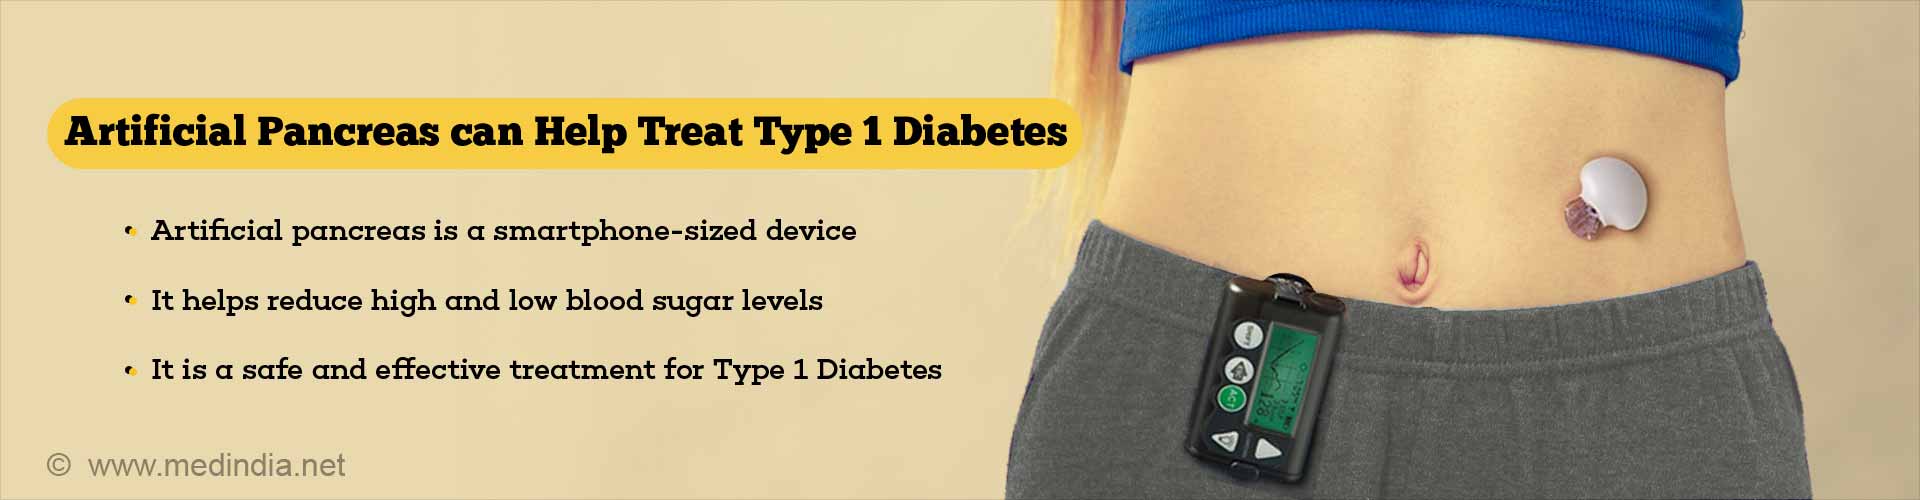 Artificial pancreas can help treat type 1 diabetes
- artificial pancreas is a smartphone-sized device 
- it helps reduce high and low blood sugar levels
- it is a safe and effective treatment for type 1 diabetes